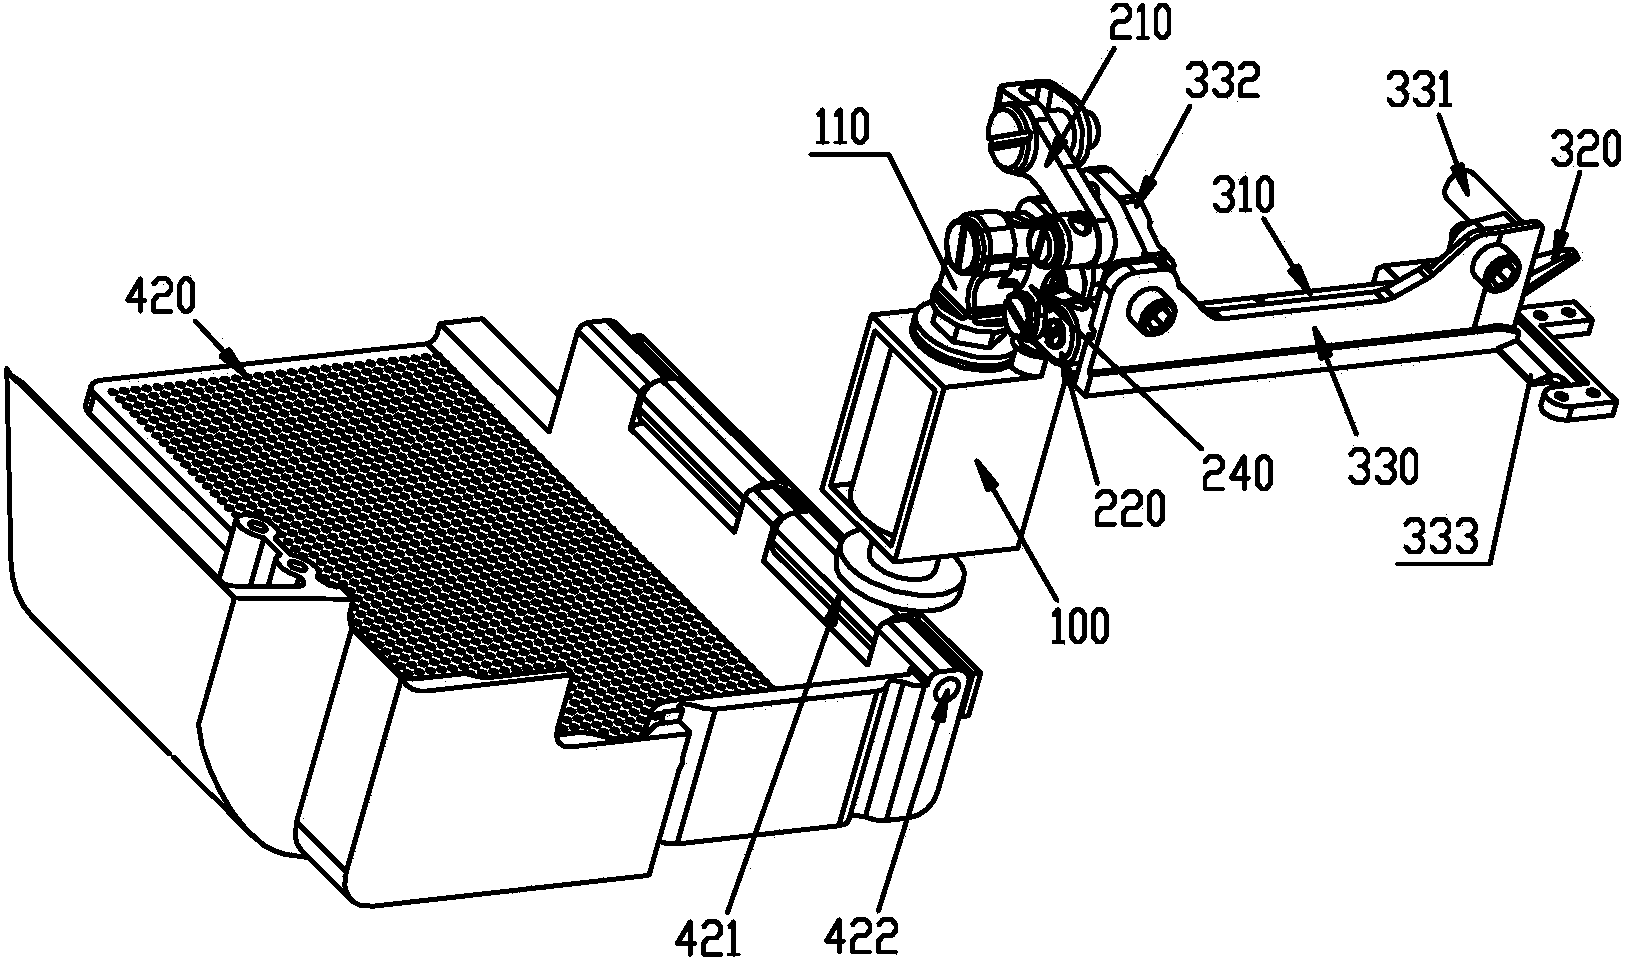 Built-in automatic thread trimming mechanism of sewing machine